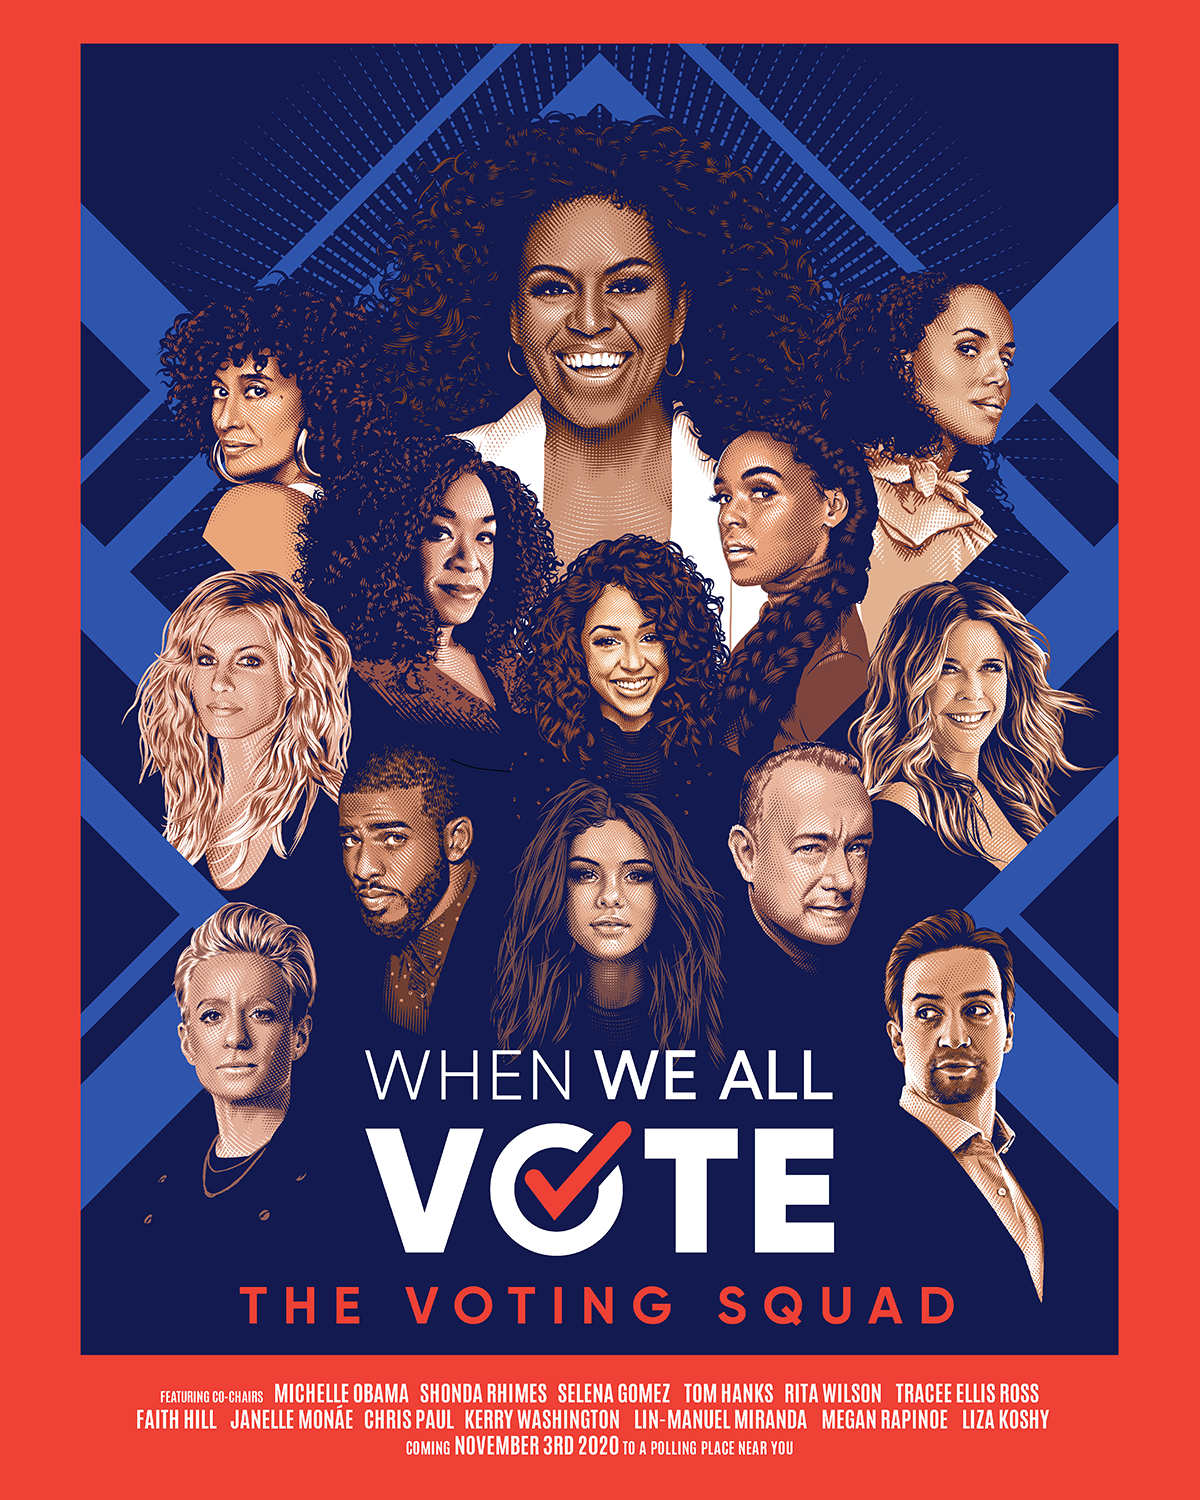 Shonda Rhimes, Tracee Ellis Ross and Kerry Washington Join Michelle Obama's 'Voting Squad'